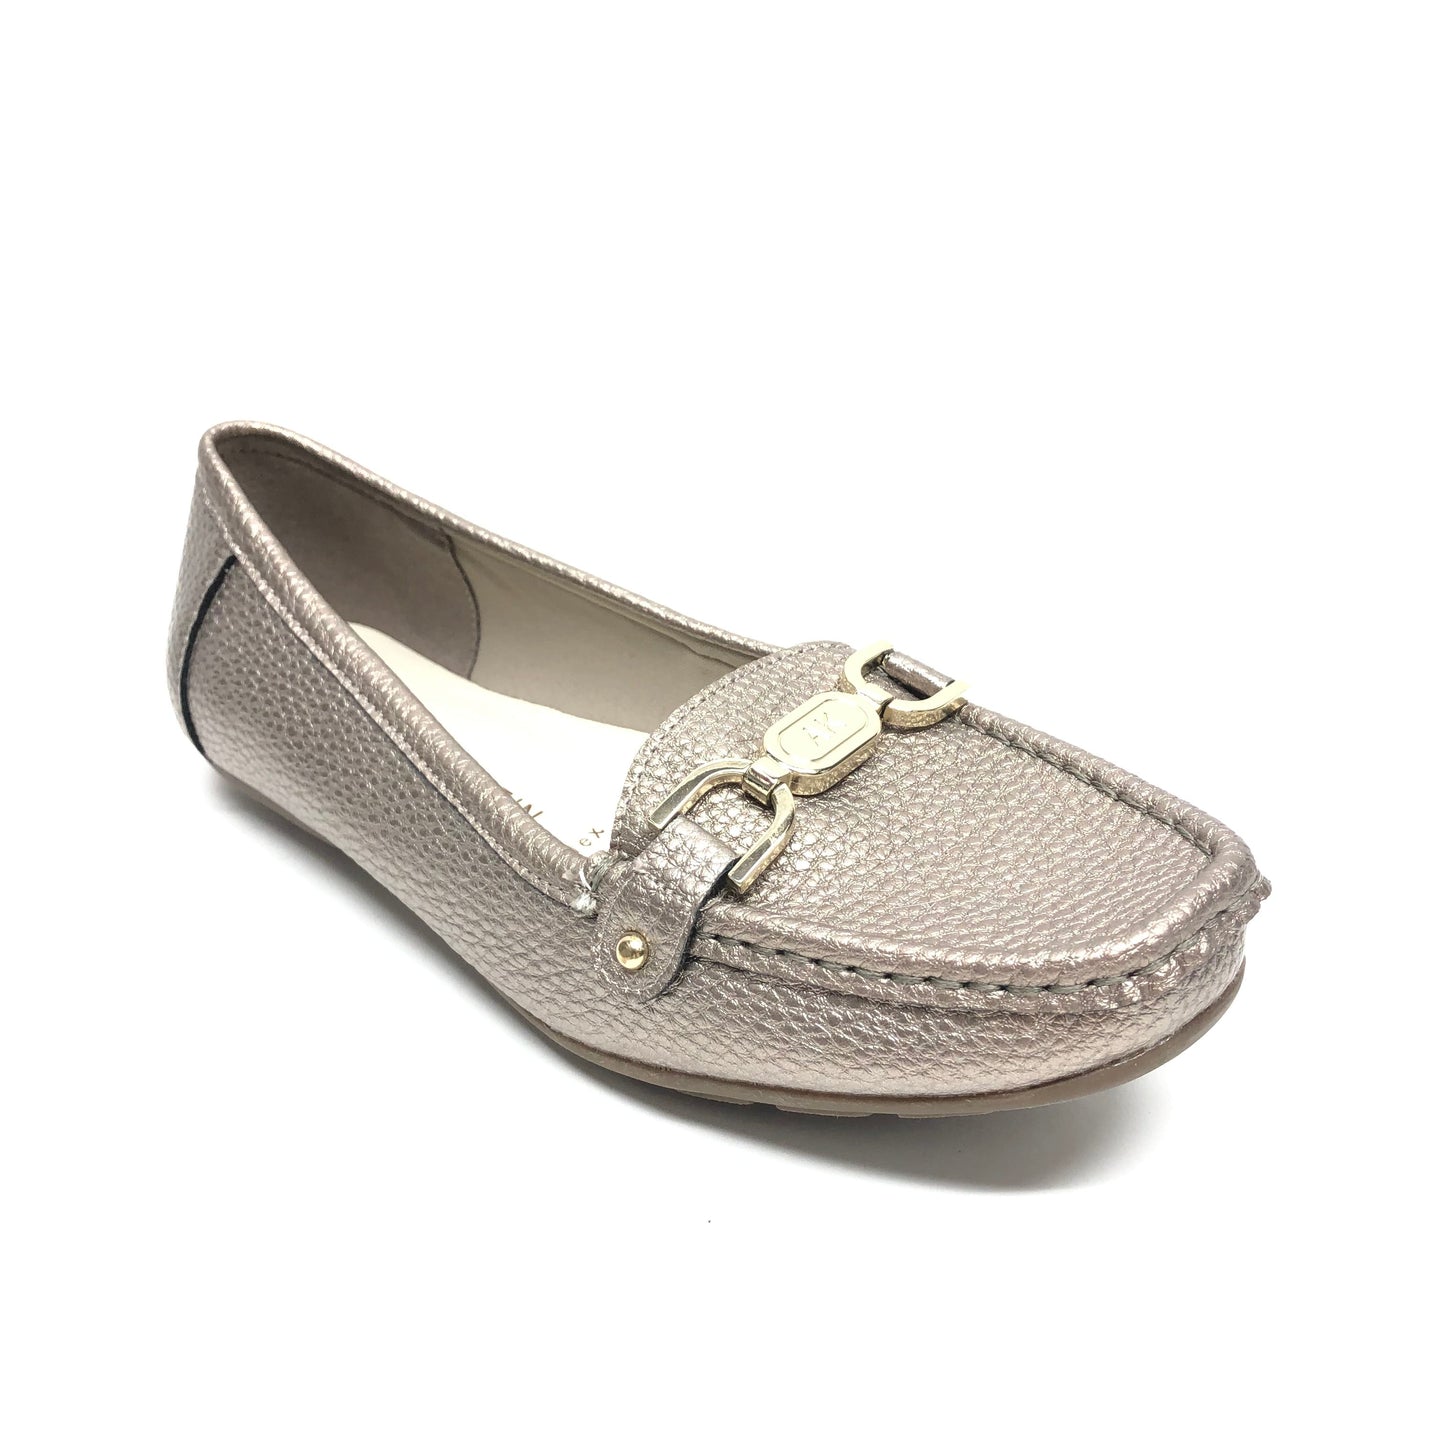 Shoes Flats By Anne Klein  Size: 7